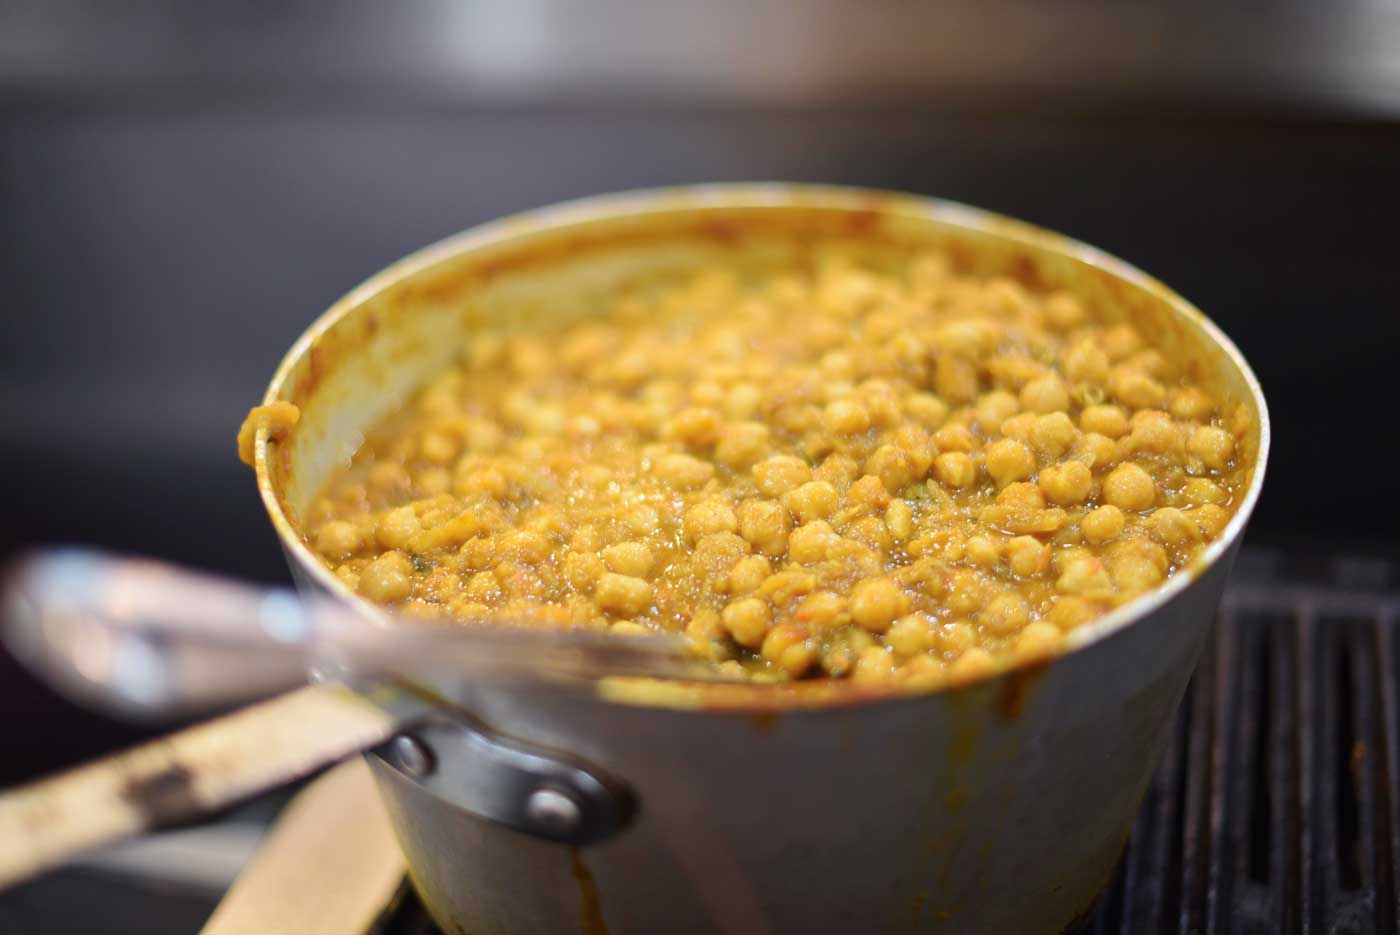 Lentils and sauces are a large part of South Indian style cuisine 